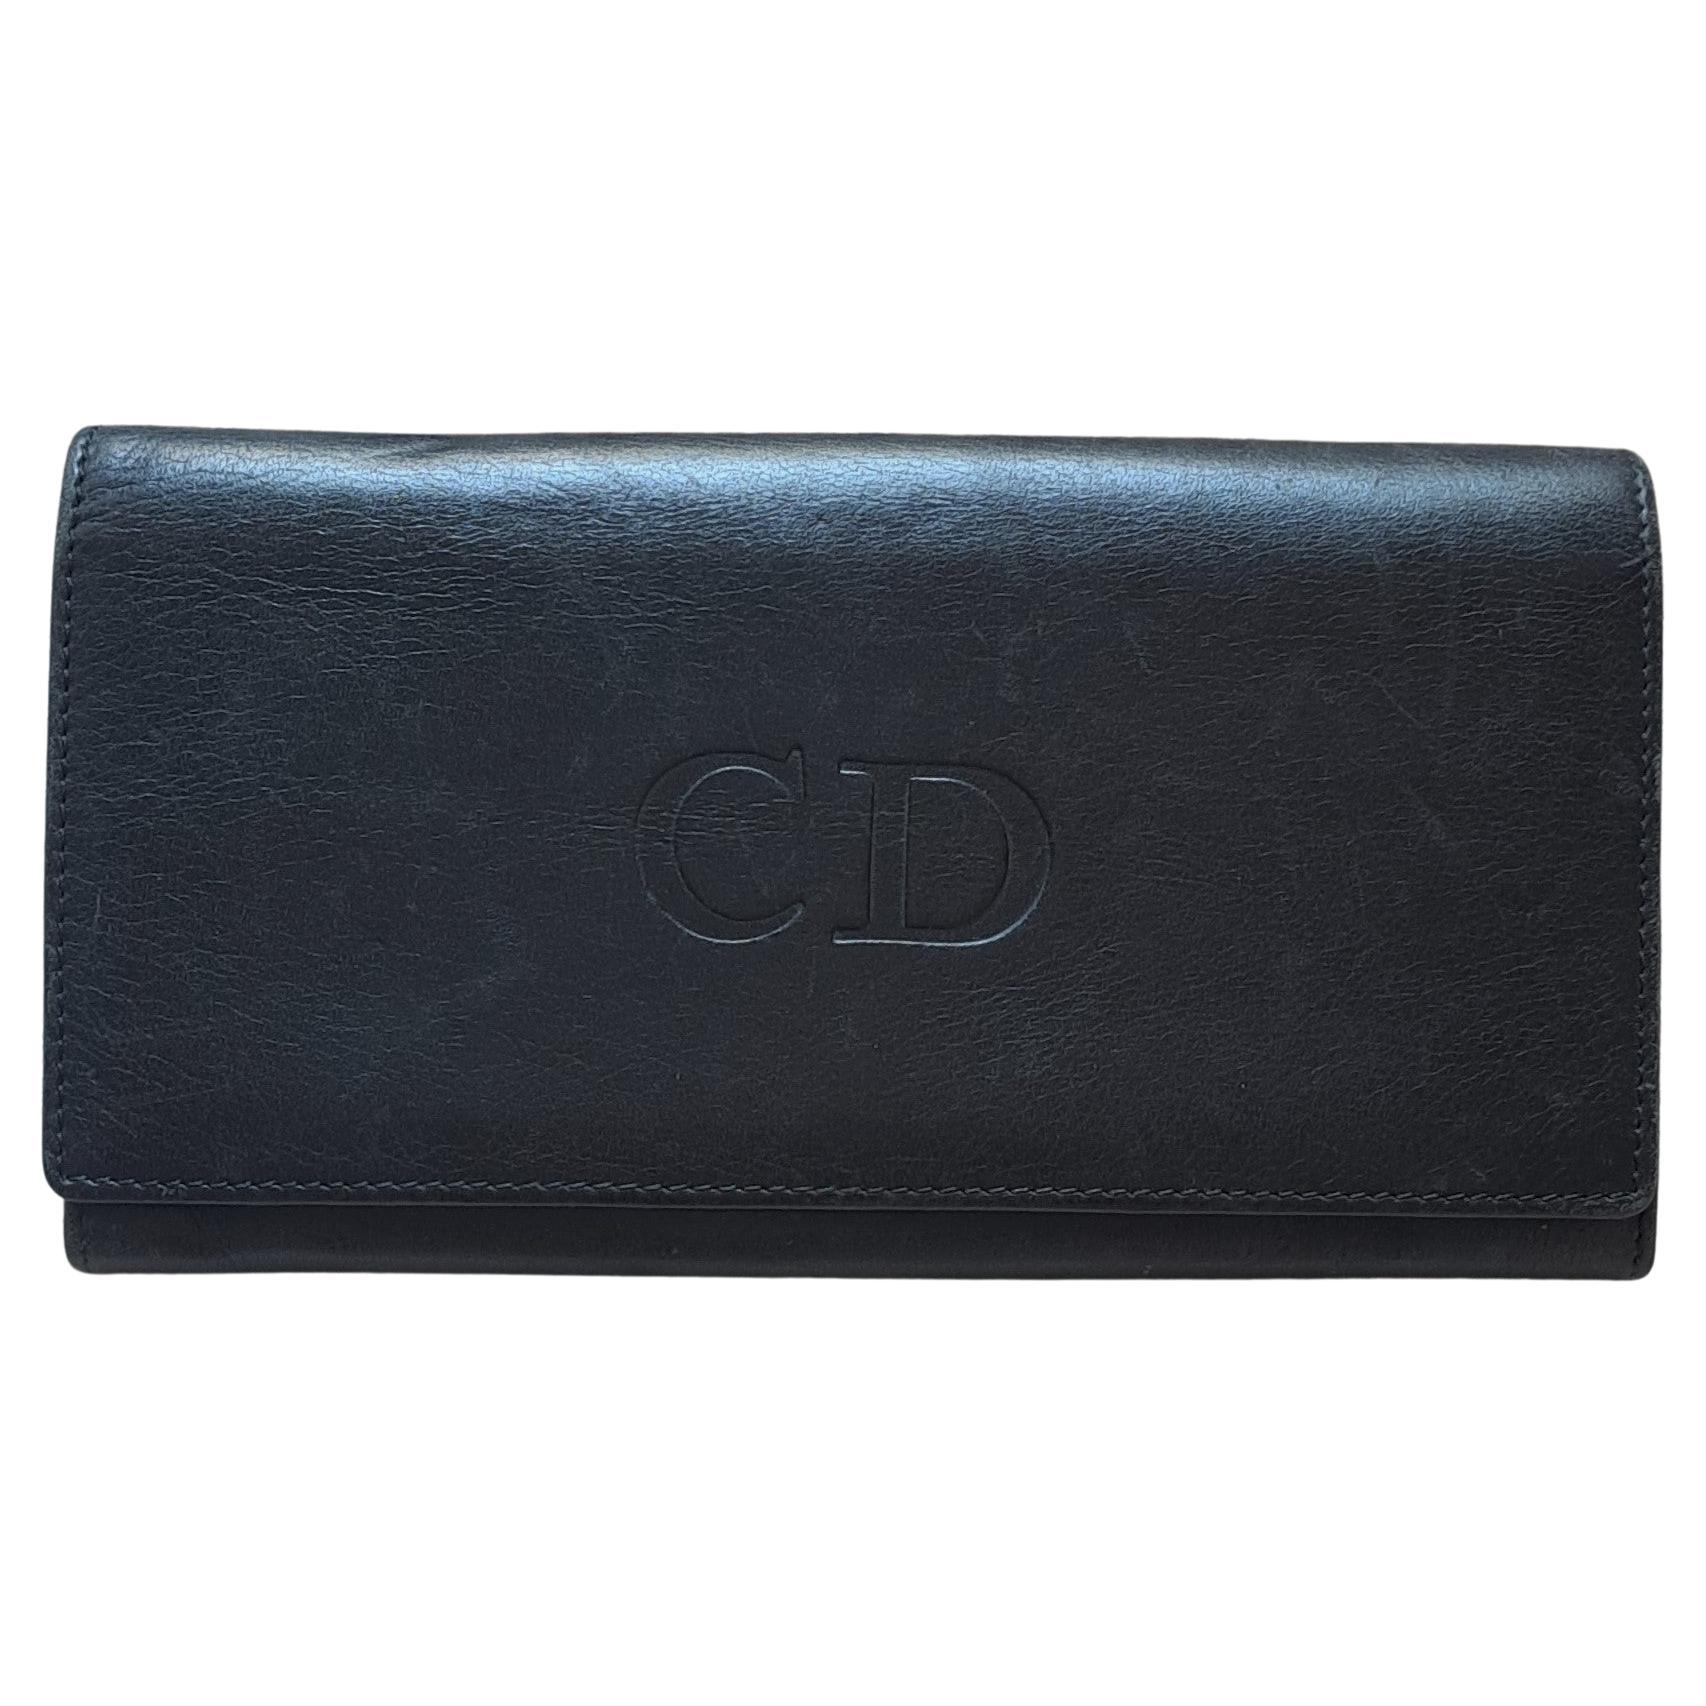 1990s Christian Dior Black Leather Wallet with Logo Charm For Sale